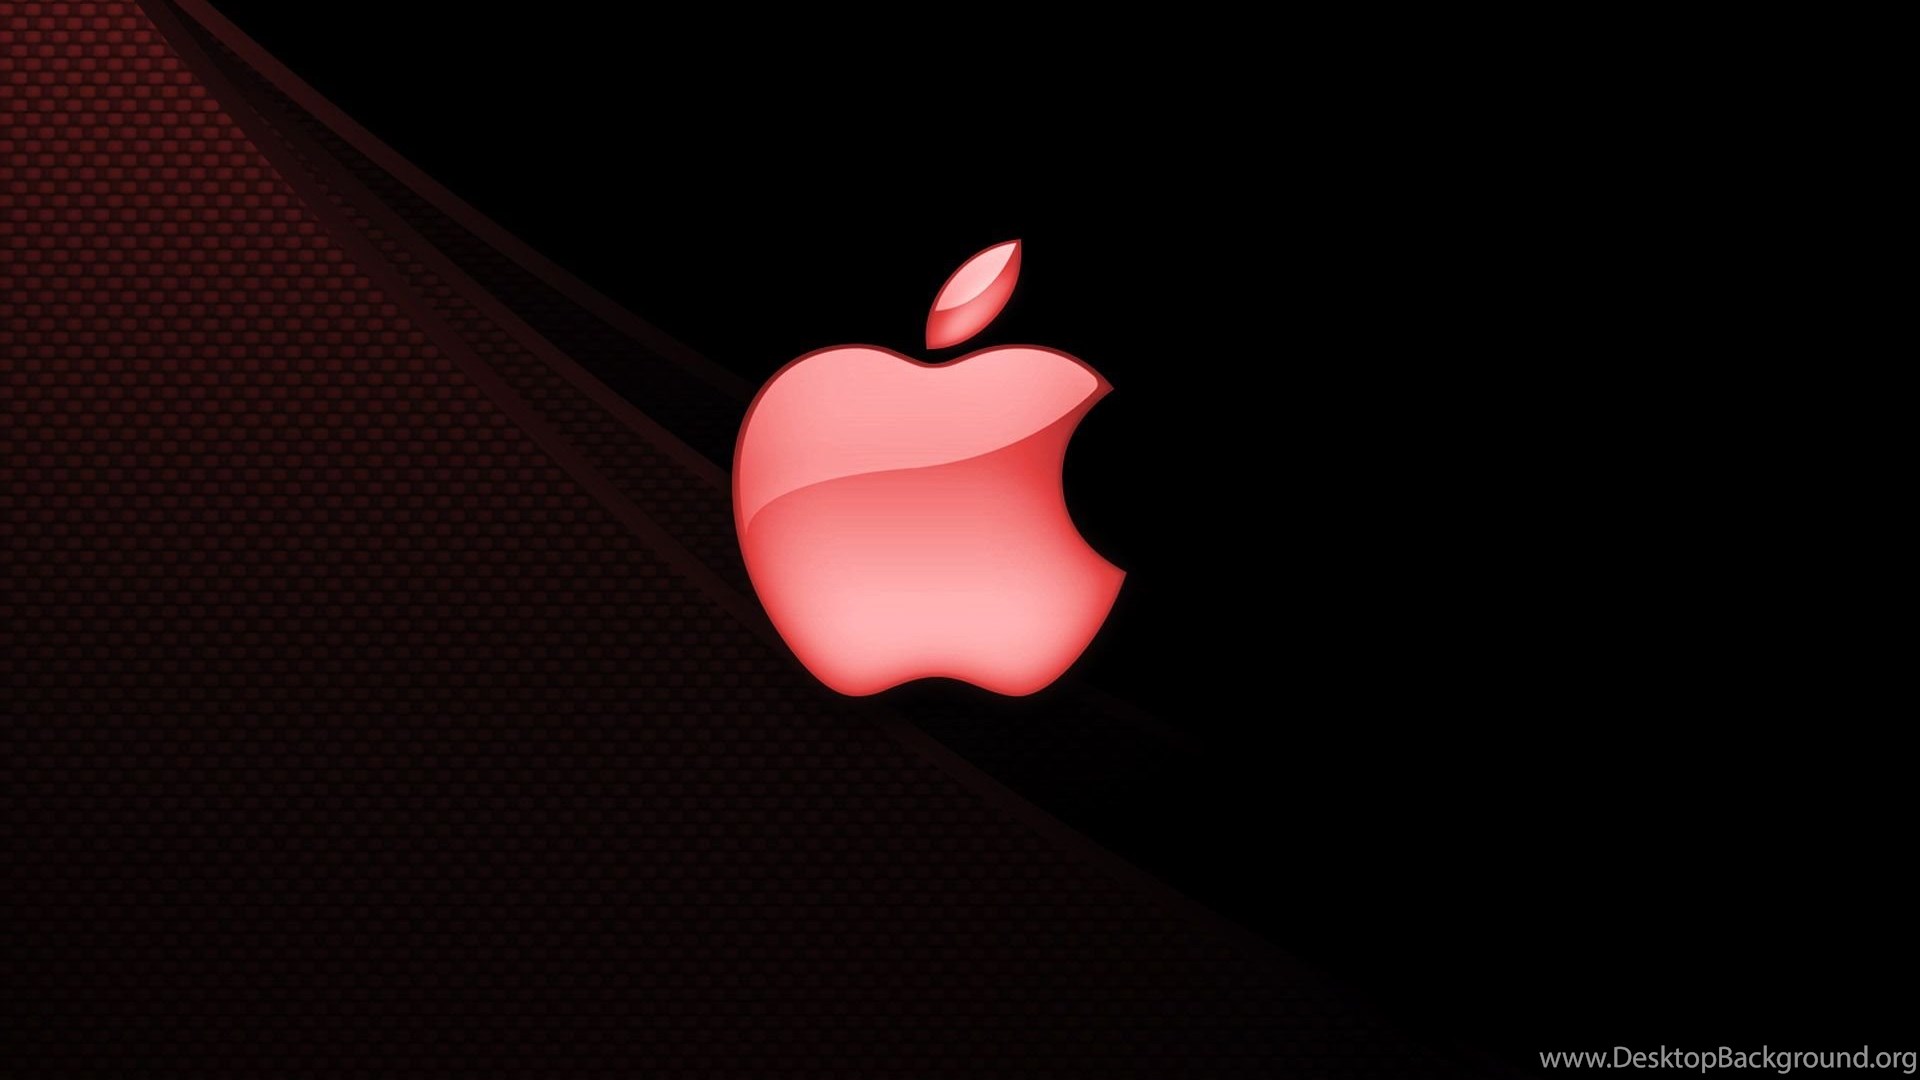 Black and Red Apple Wallpapers on WallpaperDog